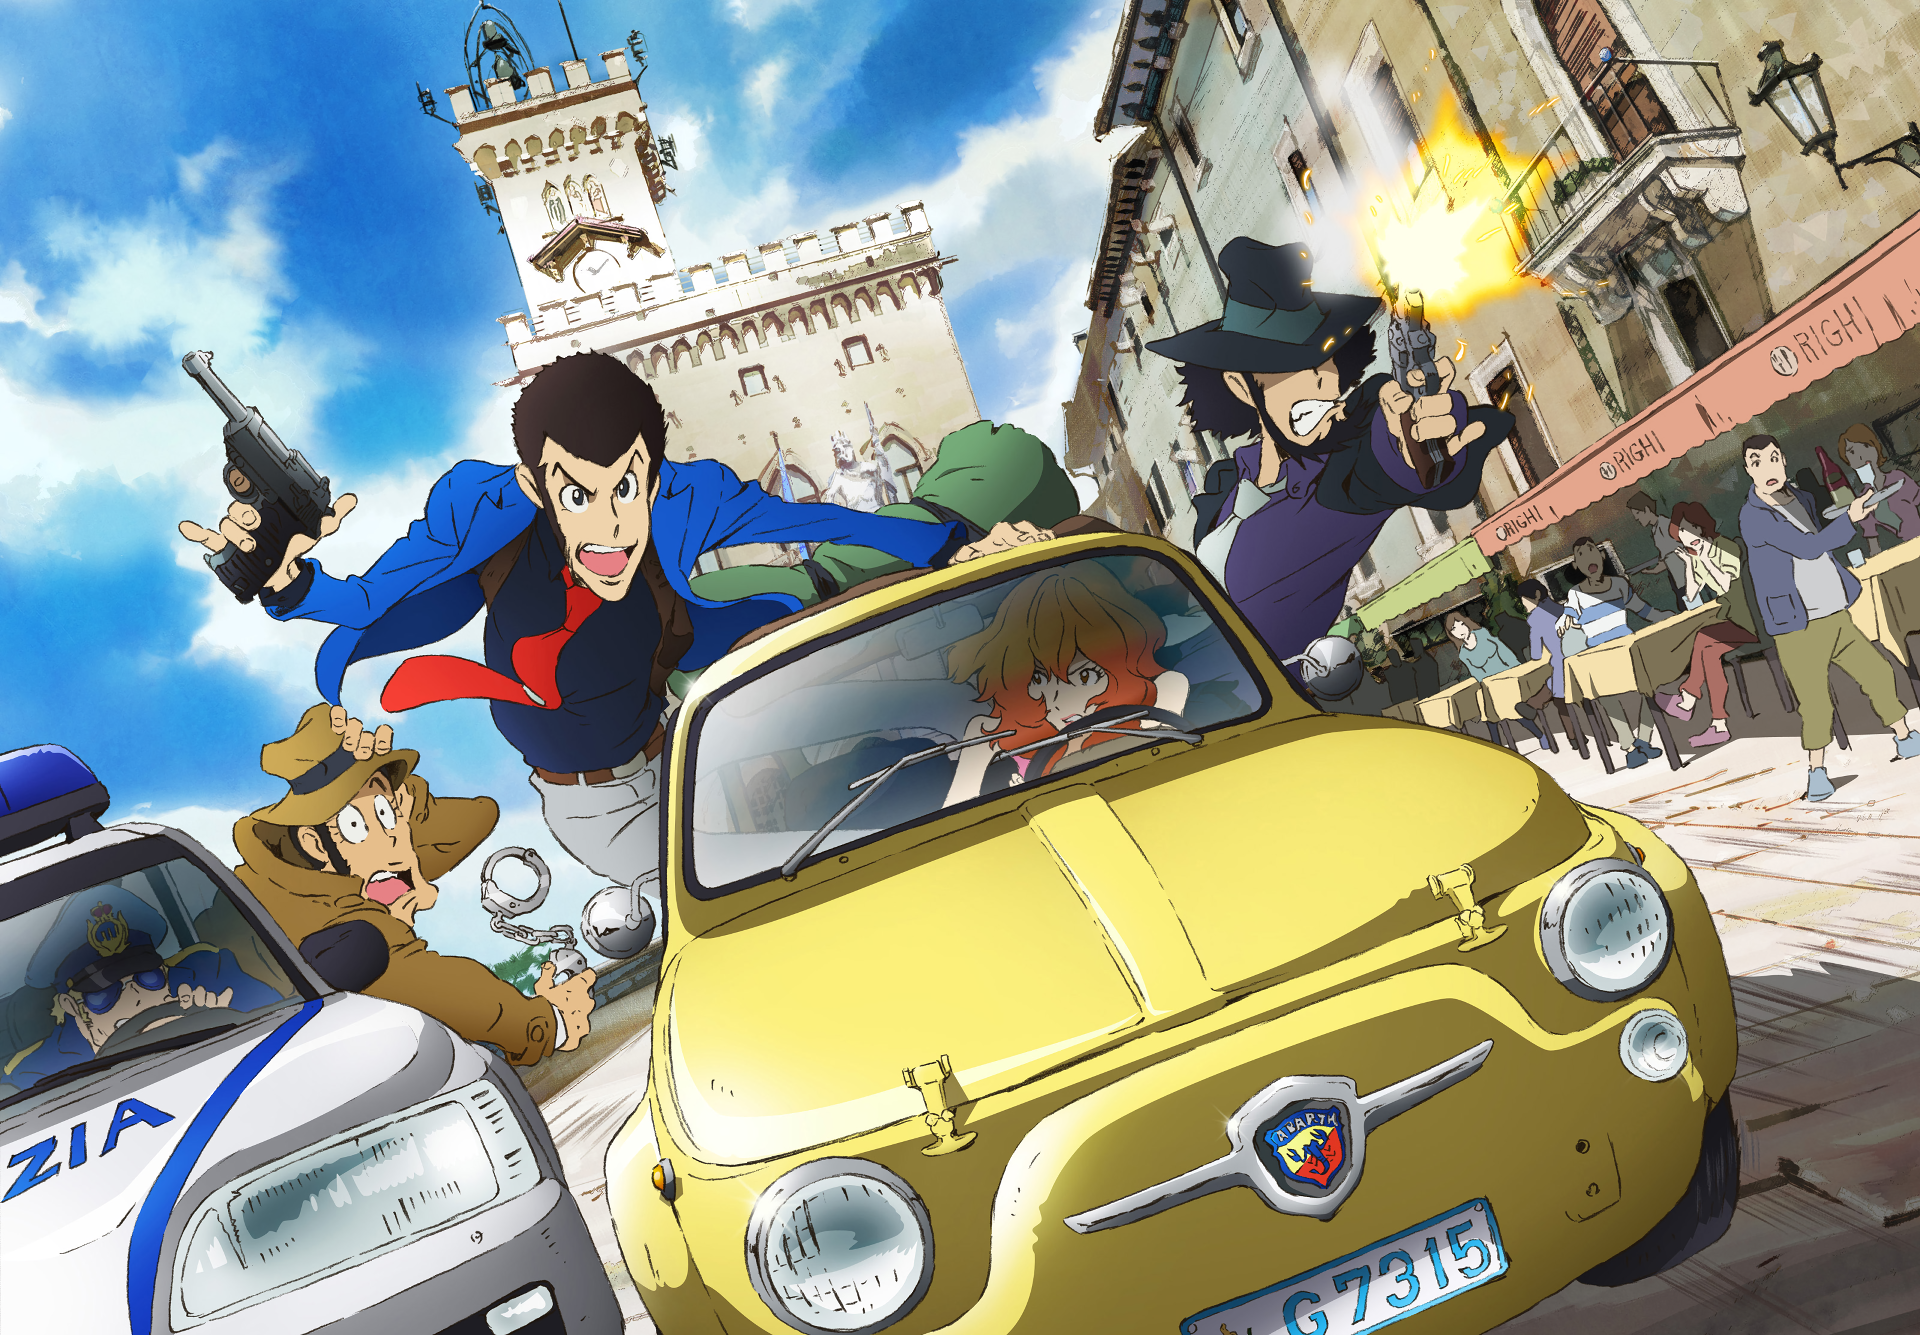 Anime Lupin The Third HD Wallpaper | Background Image